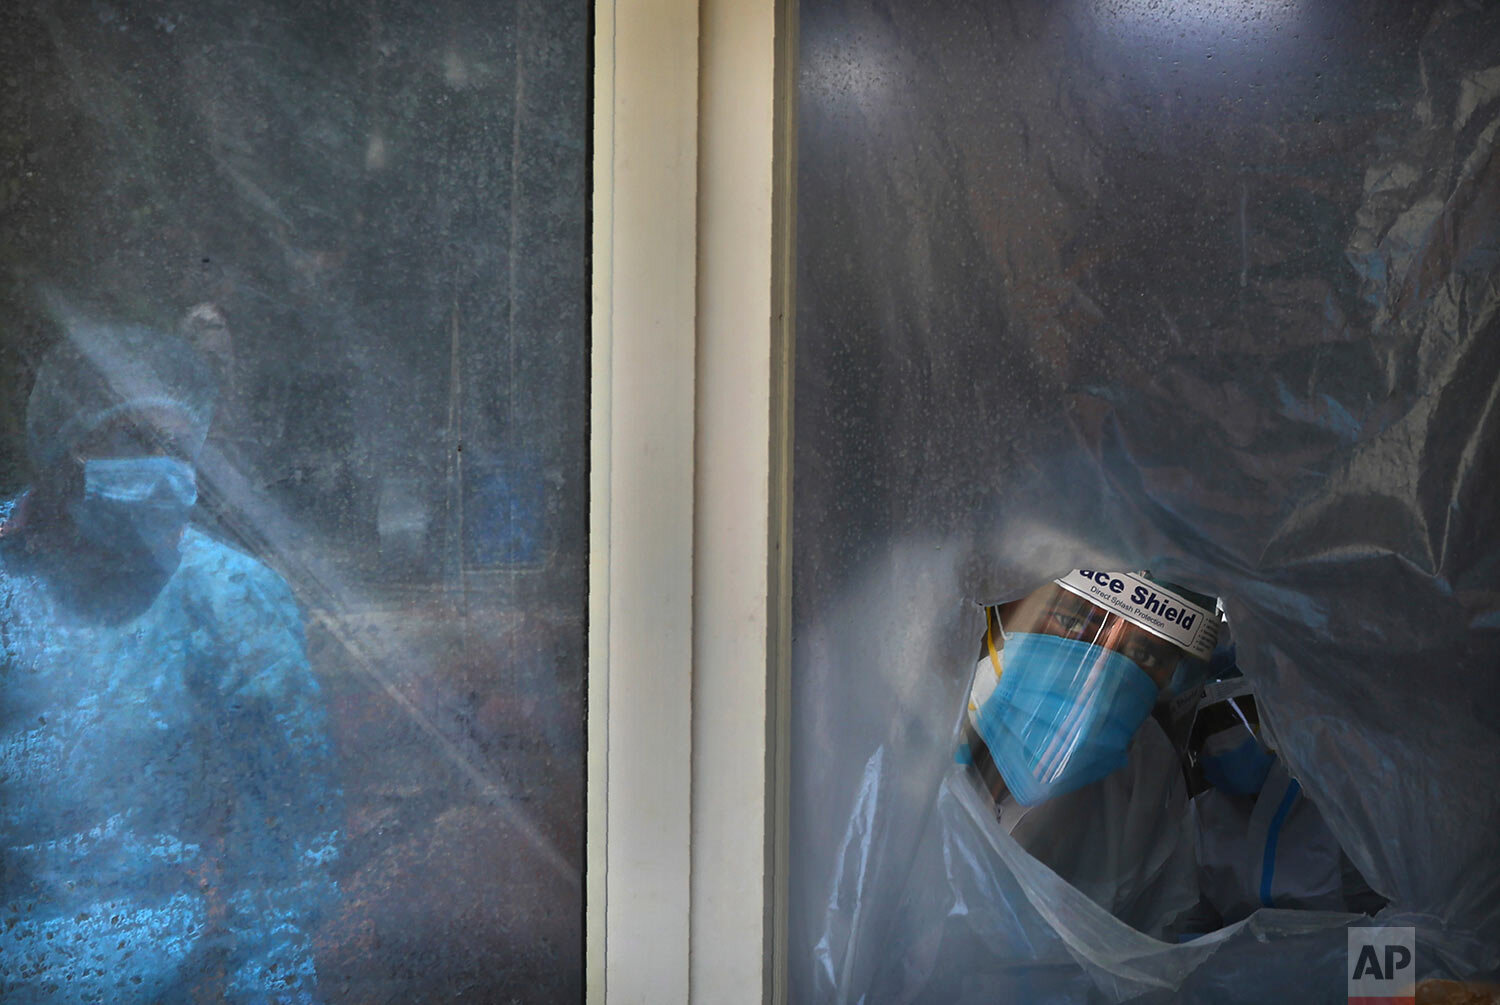  A health worker looks out from behind the plastic sheet covered window from where he conducts tests for COVID-19 in New Delhi, India, Saturday, Sept. 5, 2020.  (AP Photo/Manish Swarup) 